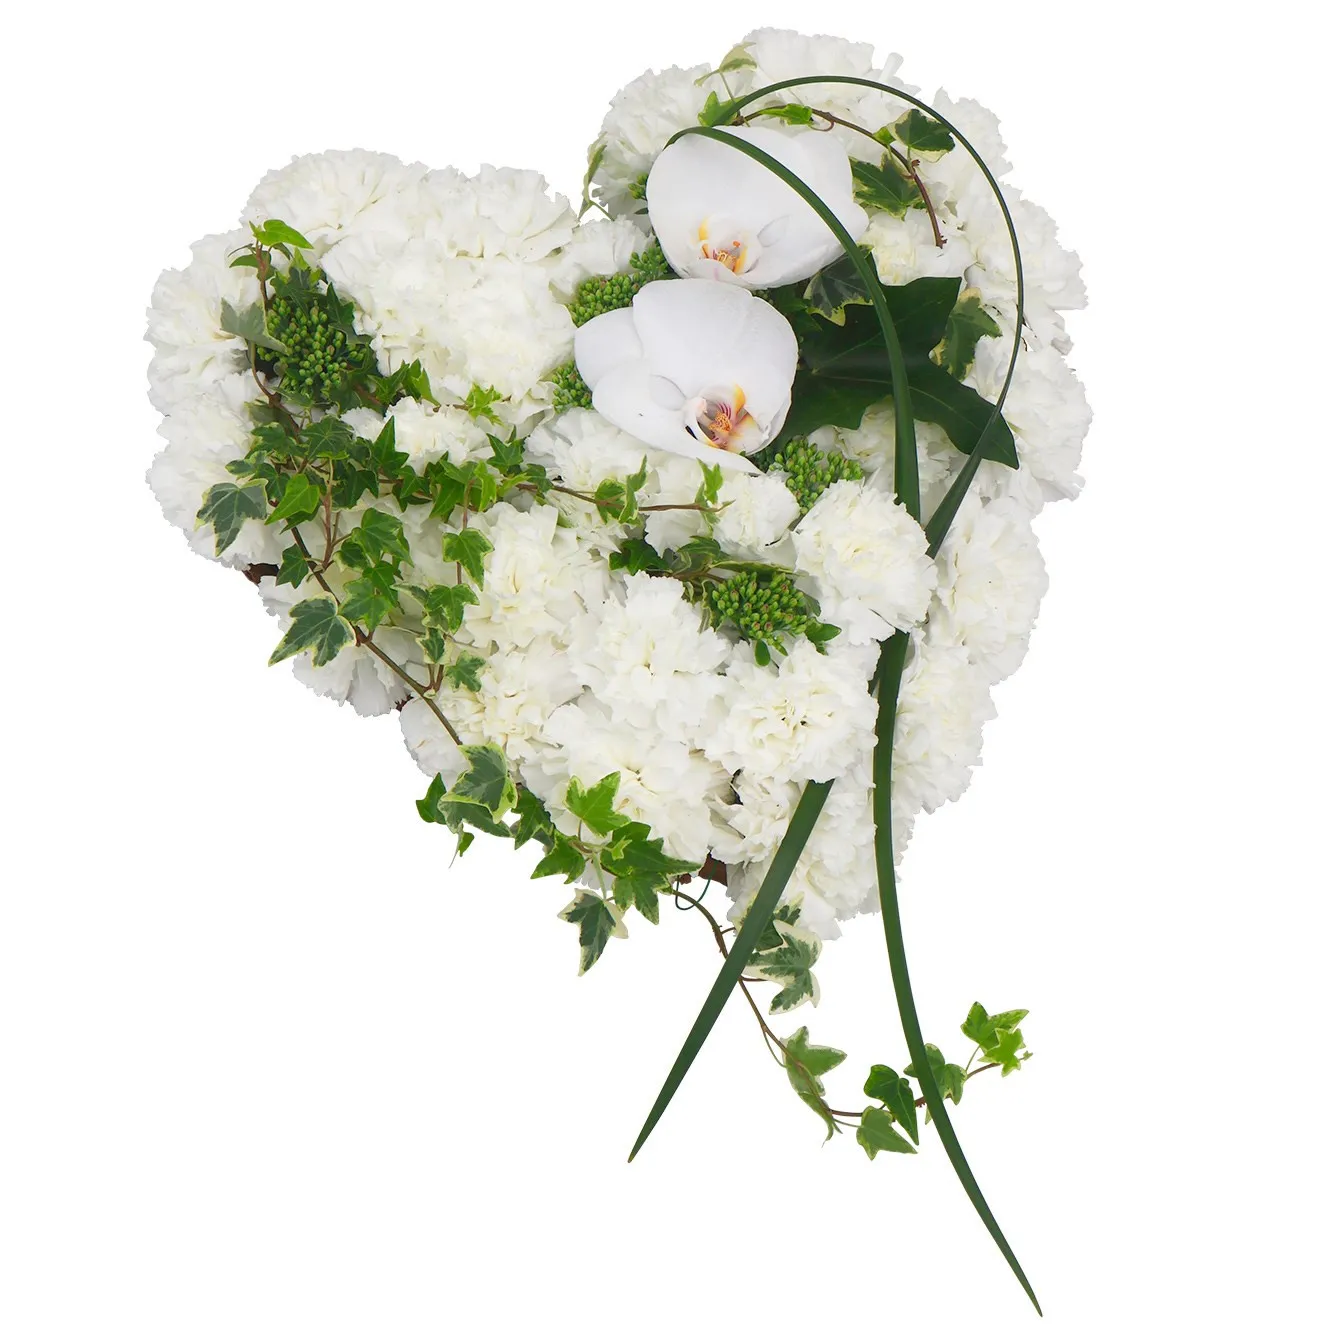 Forever in our hearts - funeral arrangement - Finland